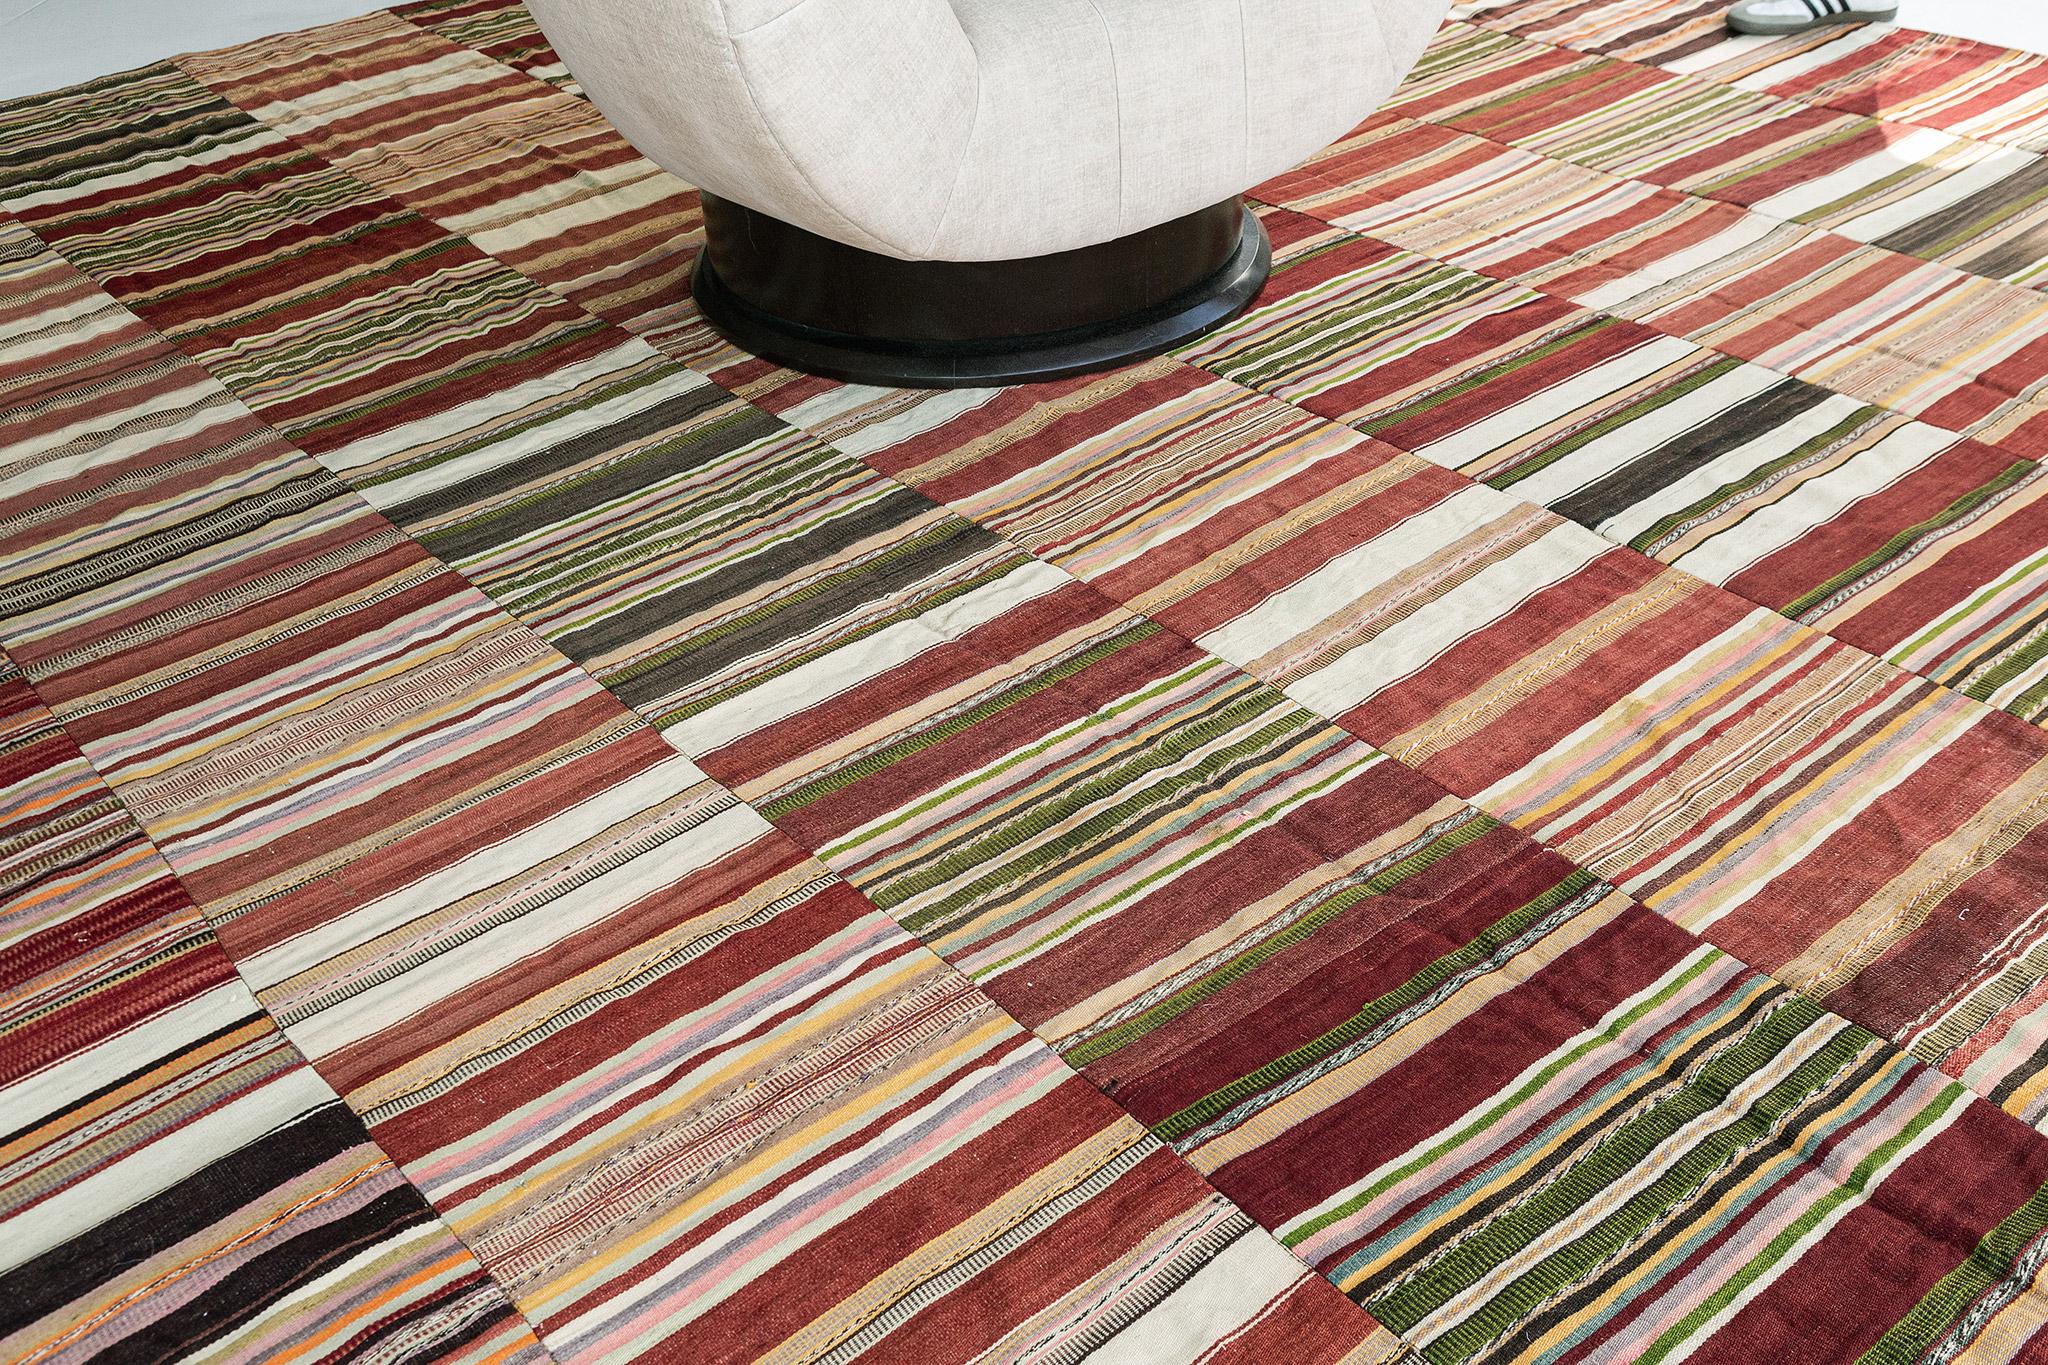 Mixing various horizontal patterns in various colours create a stunning design in this Patchwork Turkish Kilim rug. Featuring both wide and narrow bands in multiple colours, stripes are a Classic pattern. Dynamic yet tasteful, this richly textured